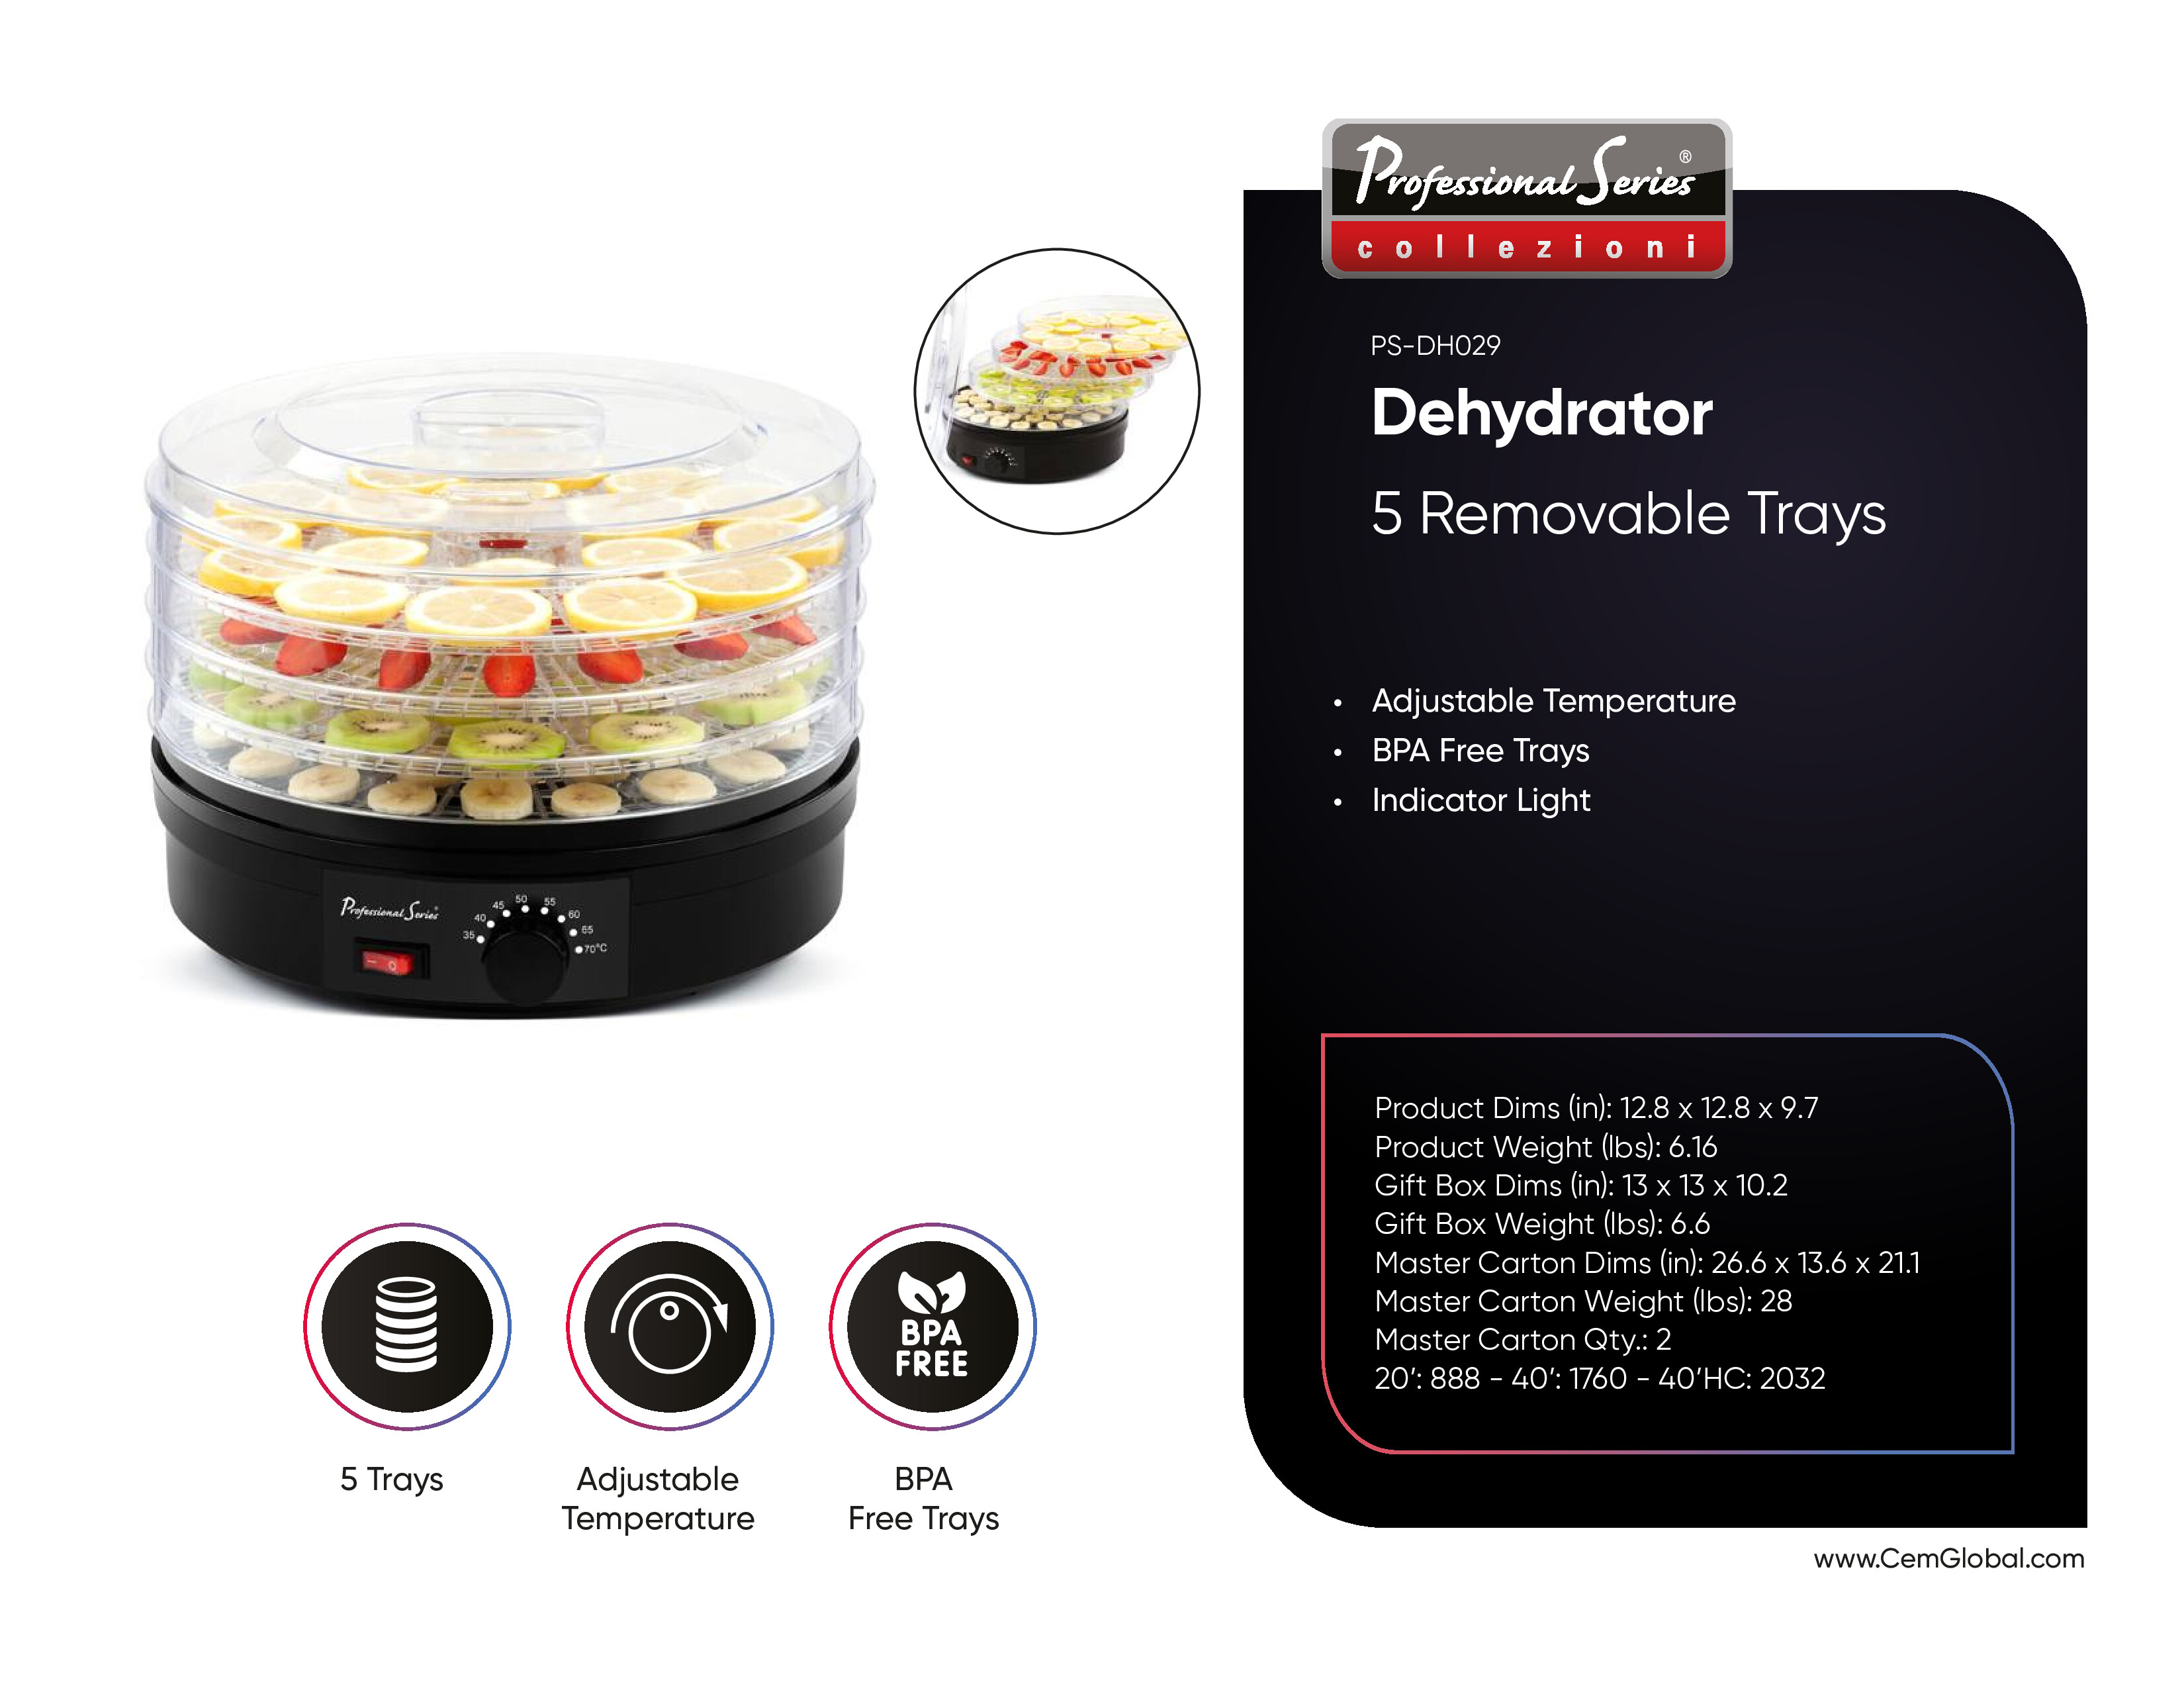 Dehydrator 5 Removable Trays